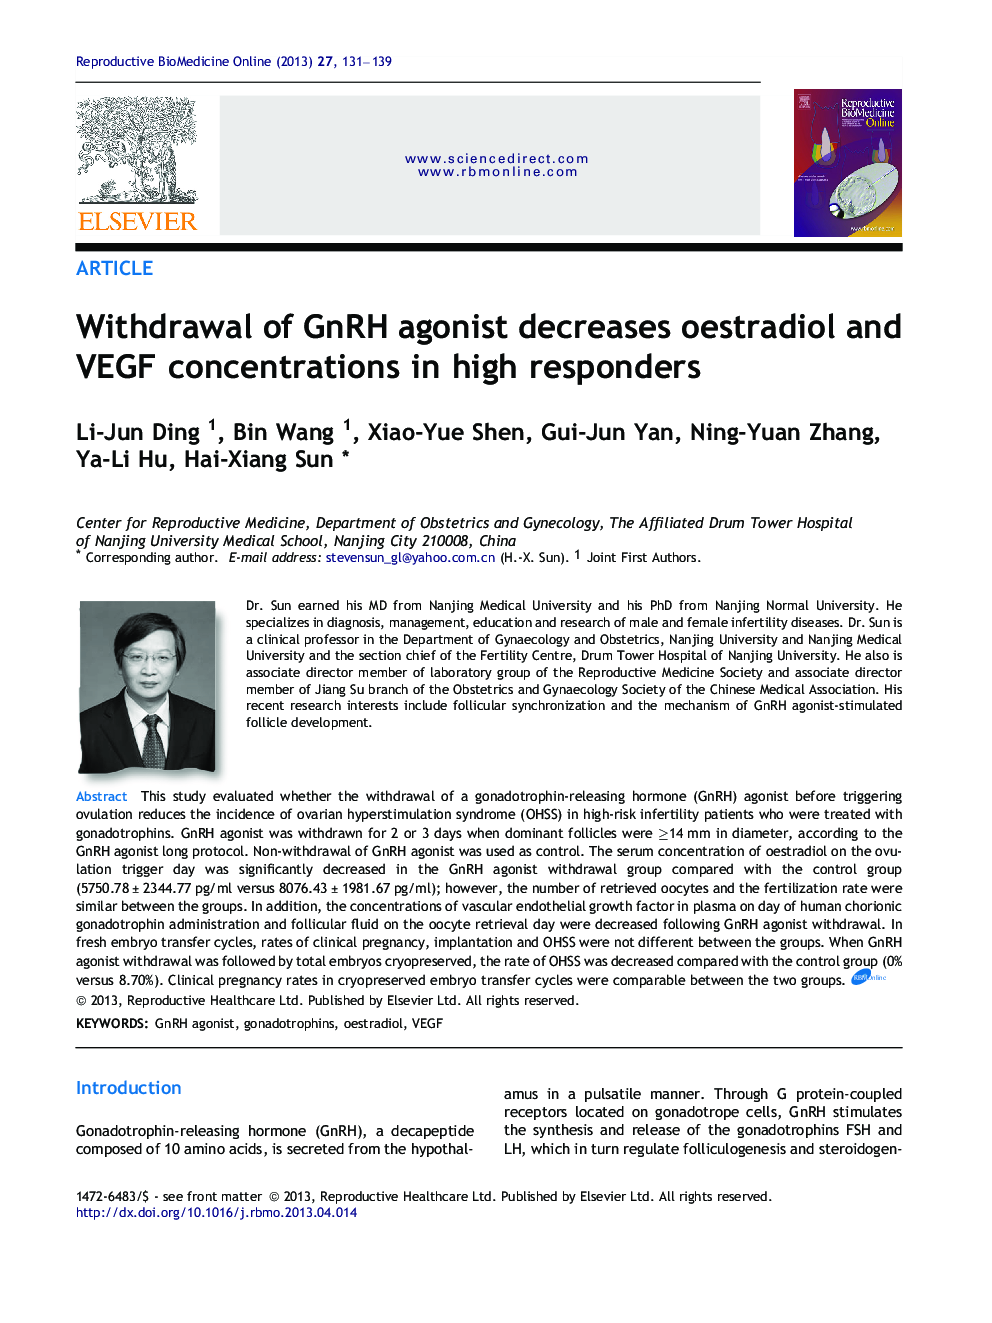 Withdrawal of GnRH agonist decreases oestradiol and VEGF concentrations in high responders 